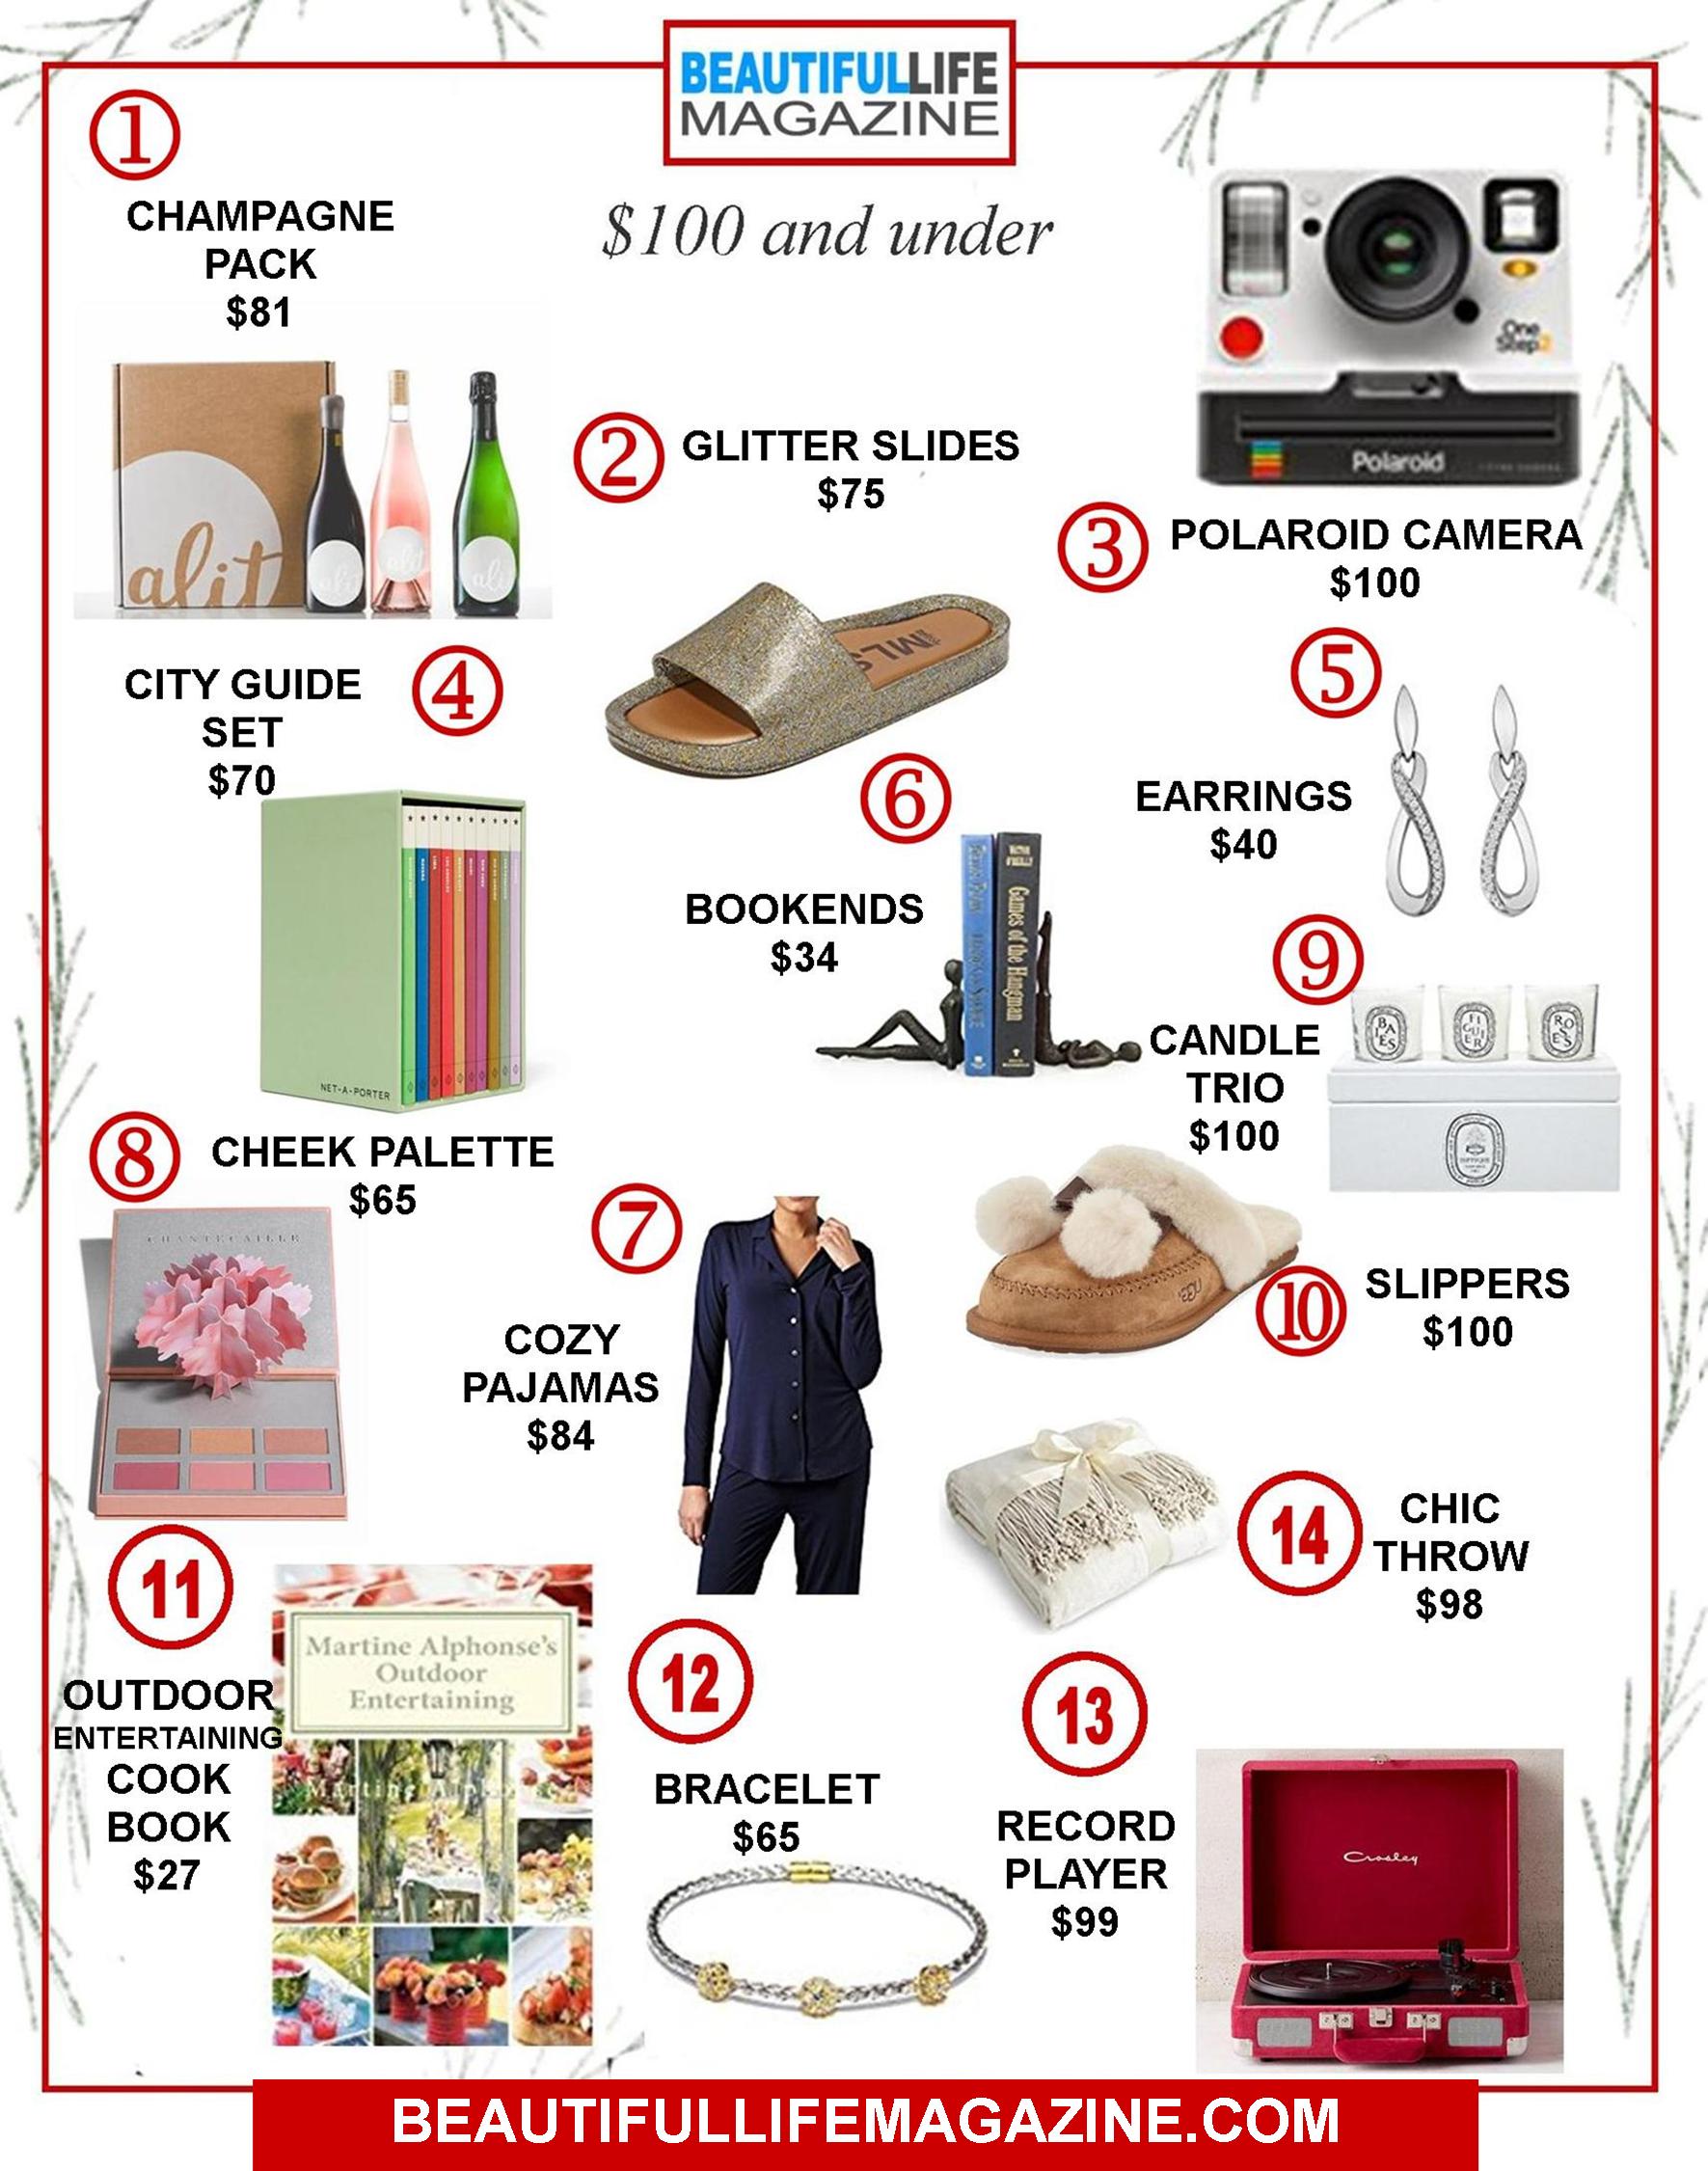 Balling on a budget this year? Check out the Beautiful Life Magazine under $100 gift picks! Luxe gifts that won't break the bank.